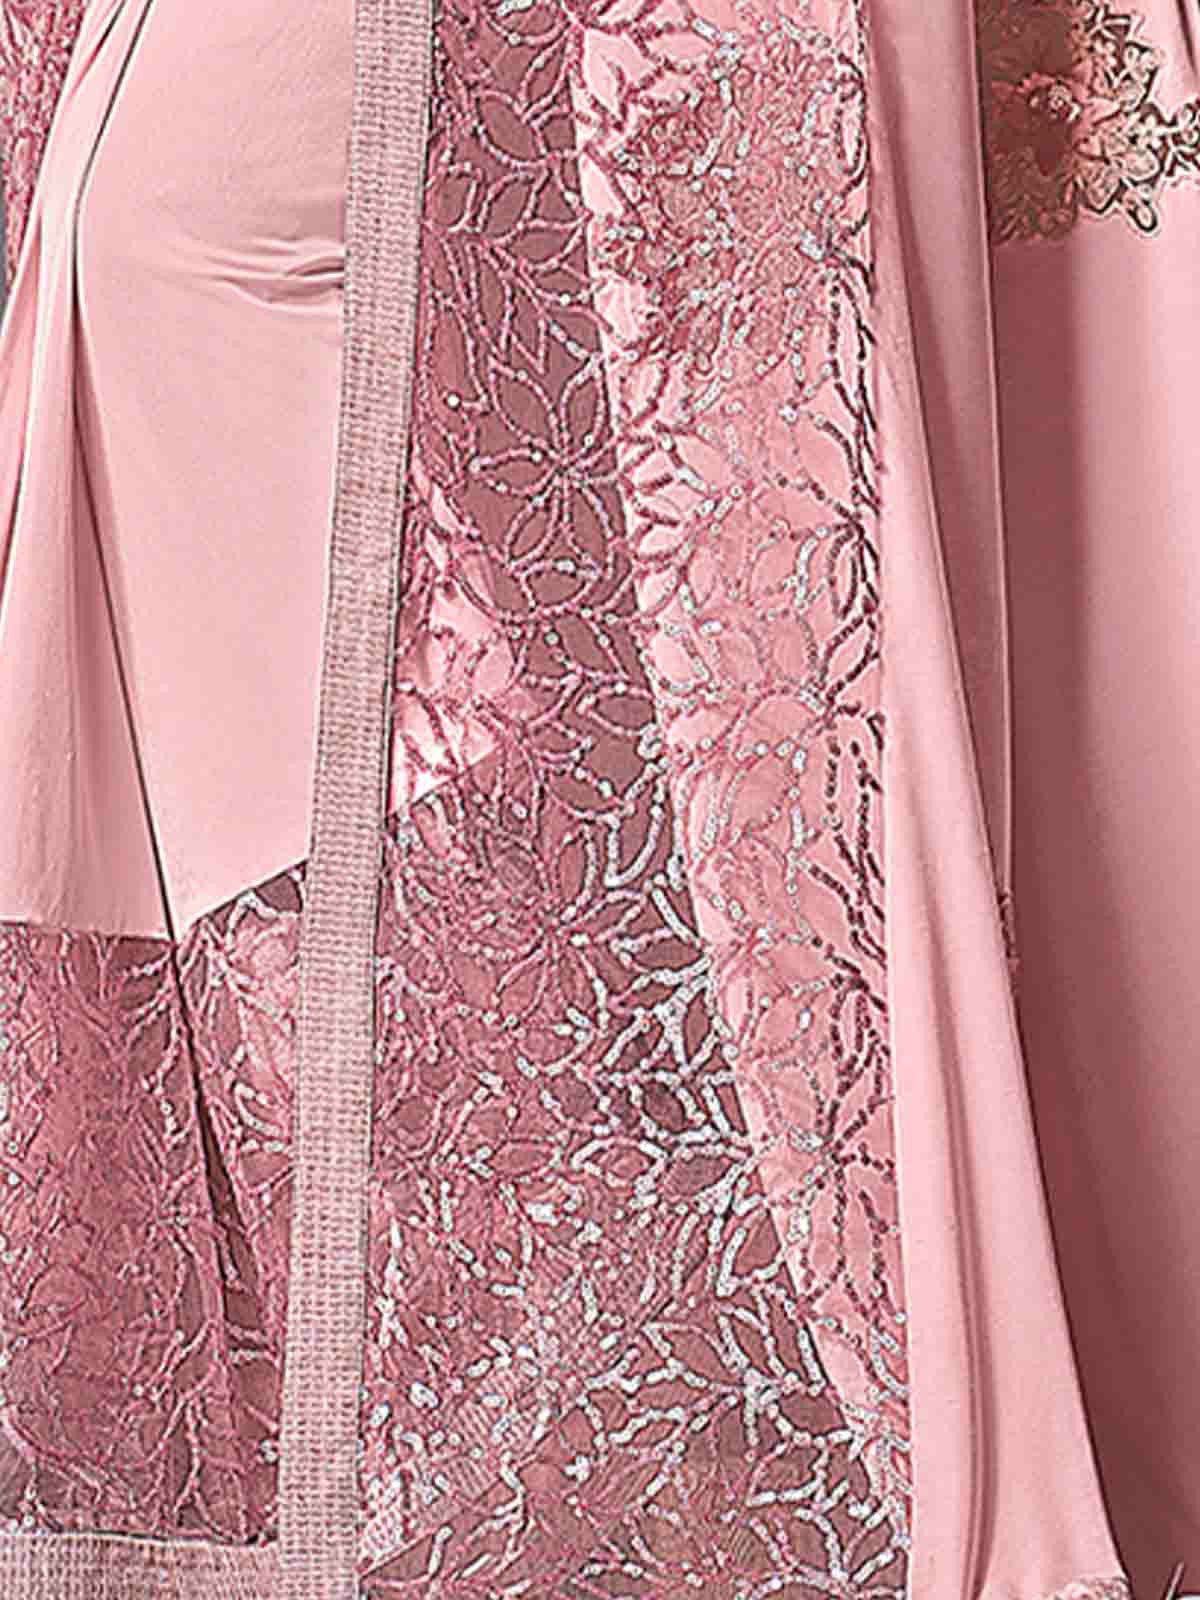 Odette Women Pink Lycra Sequins Embroidered Saree With Unstitched Blouse